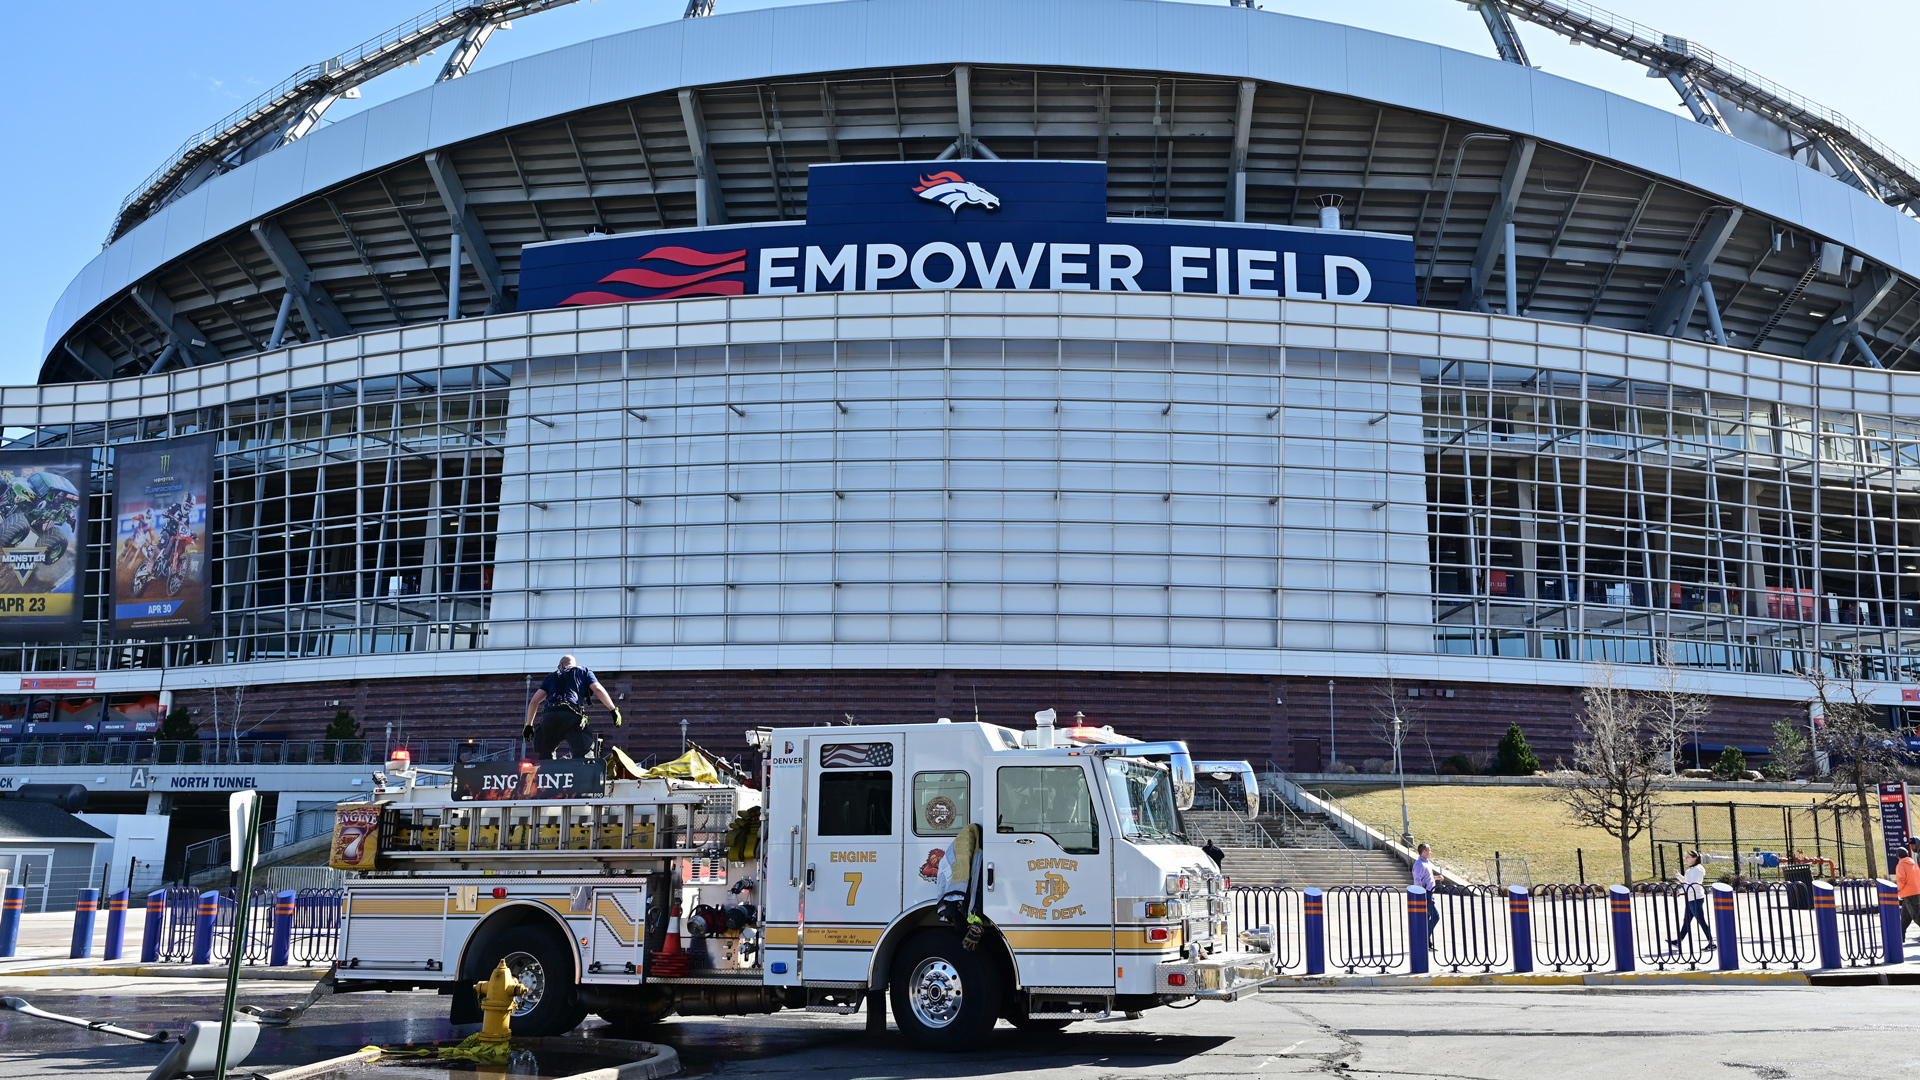 Denver Broncos' Empower Field at Mile High Catches Fire